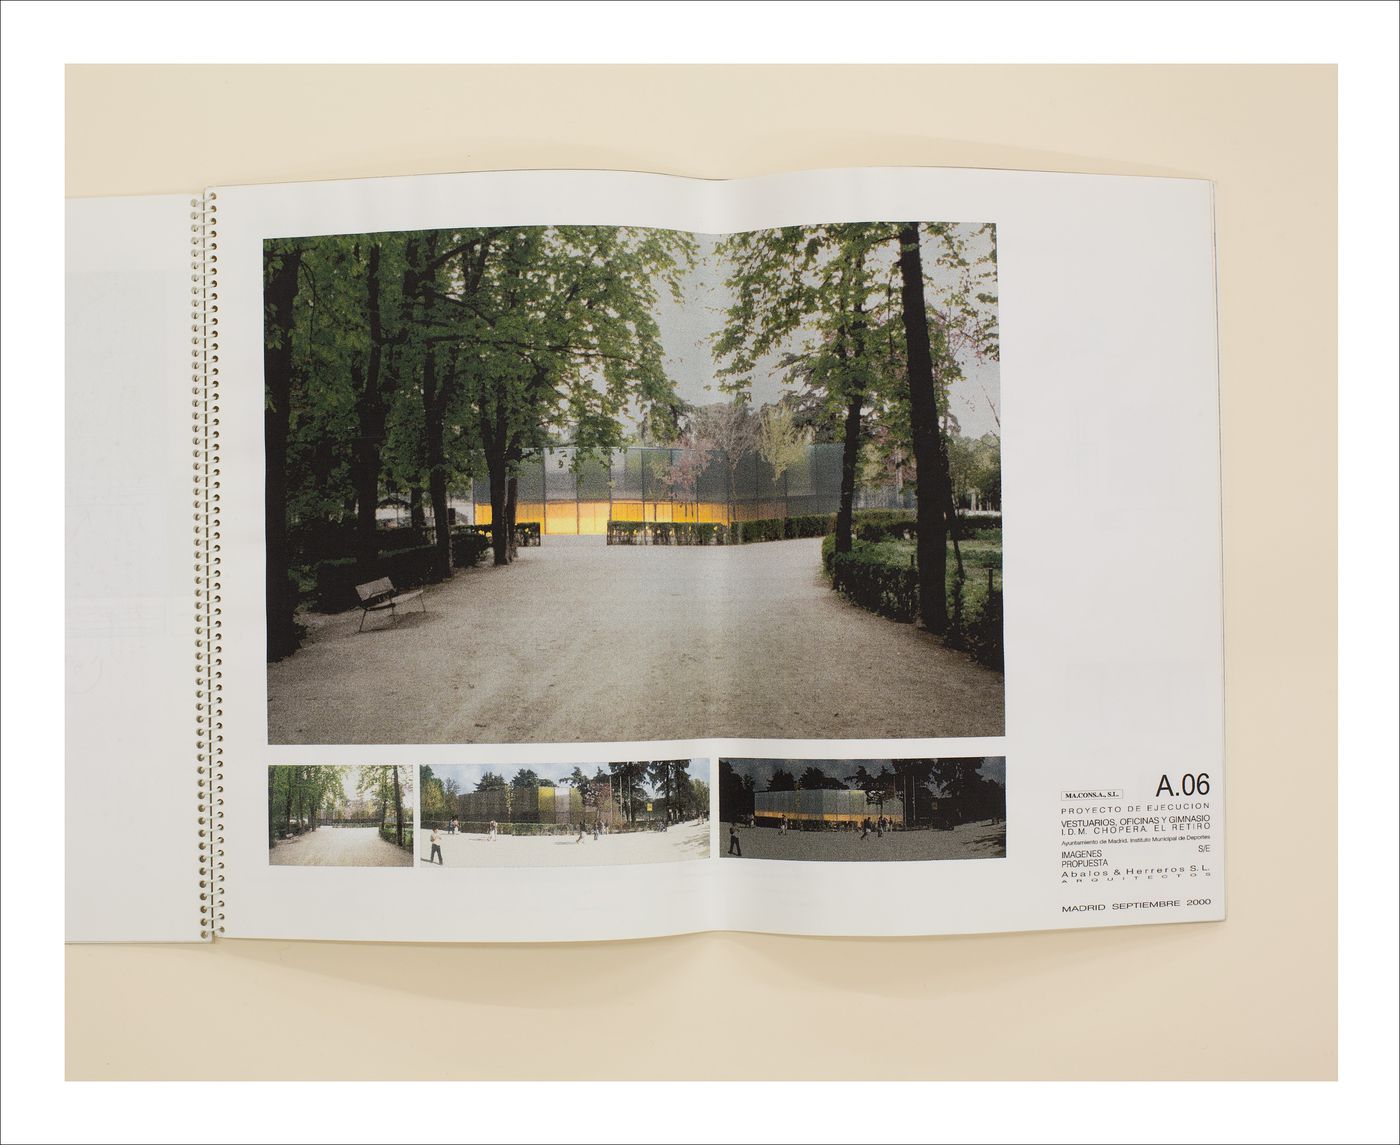 Proofs of Relevance: View of a photographic layout in a spiral-bound book for the Retiro Park Gymnasium, Abalos & Herreros (1993-2003), Madrid, Spain